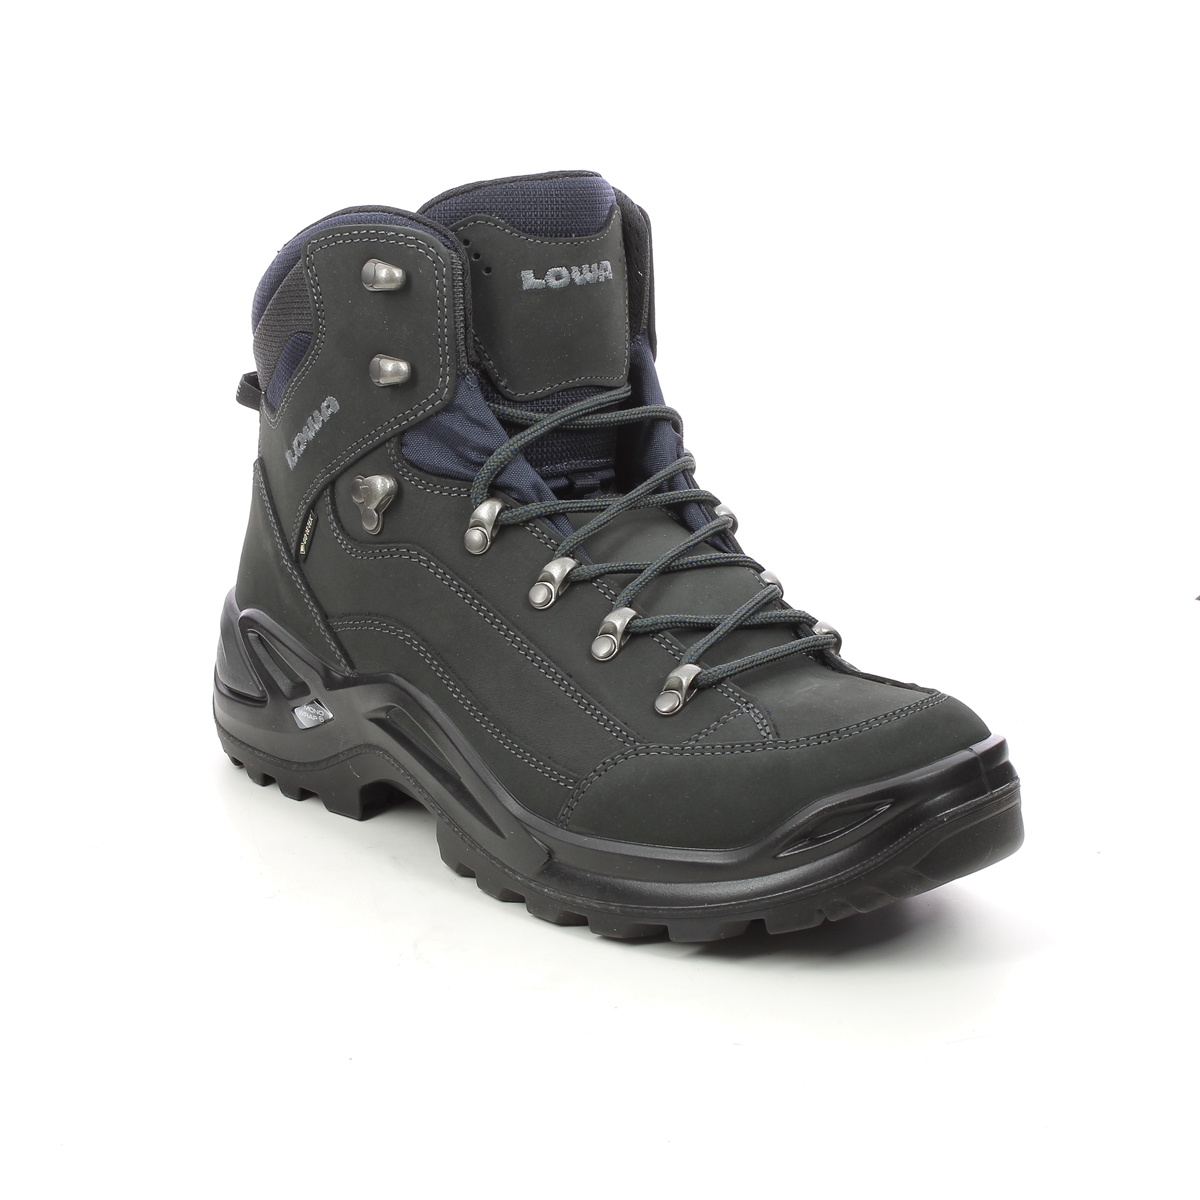 Lowa Renegade Gtx Mid Dark grey nubuck Mens Outdoor Walking Boots 310945-0954 in a Plain Leather in Size 9